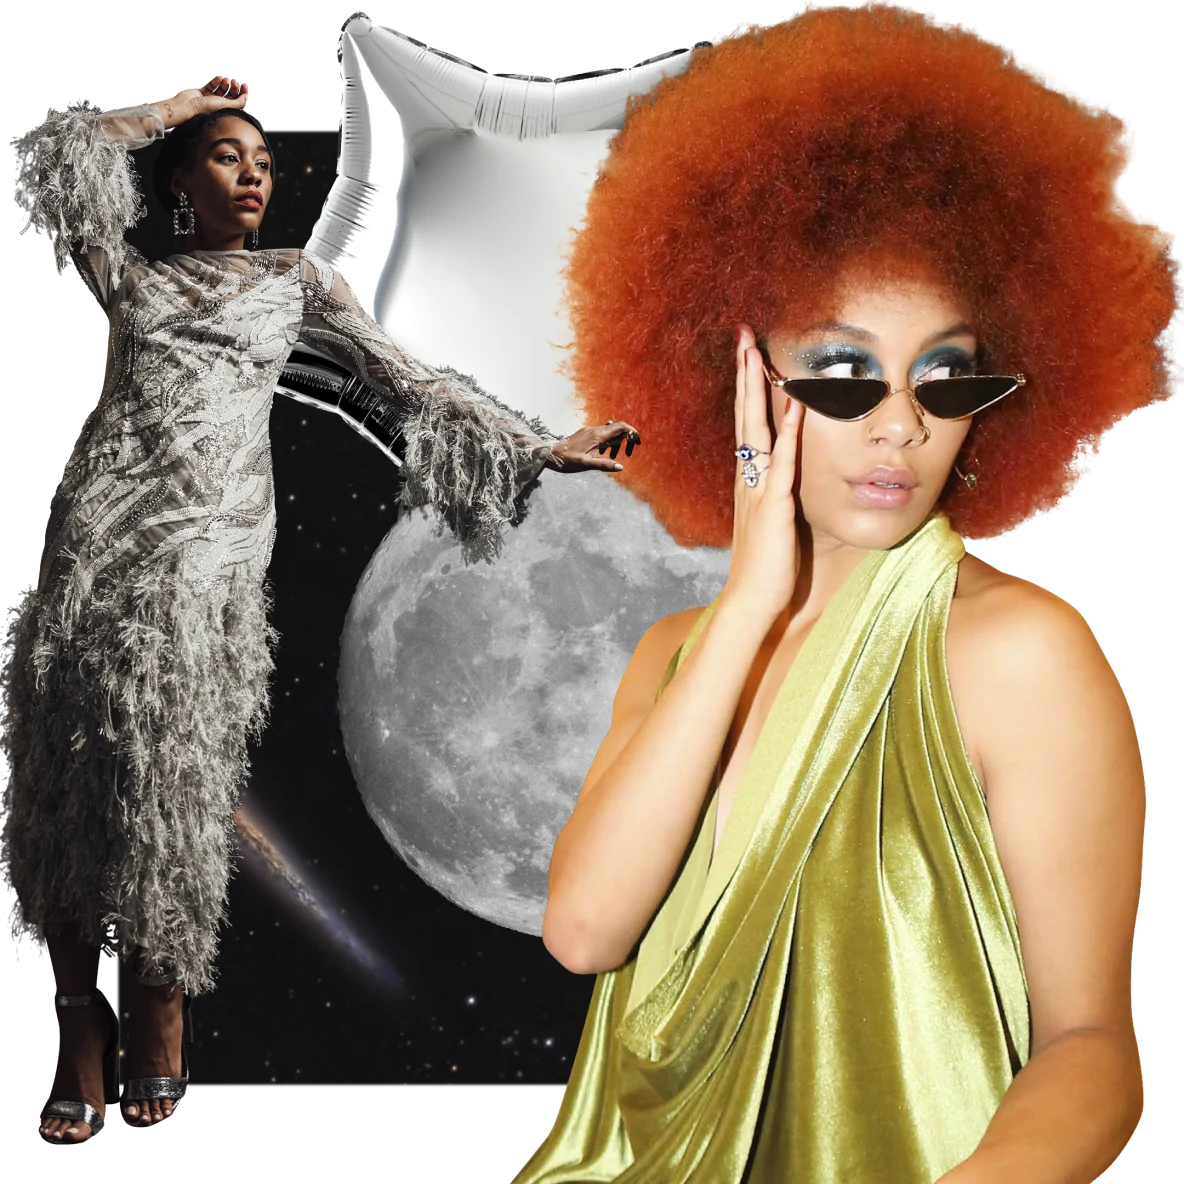 A Black woman in a shaggy, grey dress leans against a full moon on the left. A Black woman with red hair, wearing a green, silky dress is on right. The backdrop is of outer space, with a silver star balloon at the top.